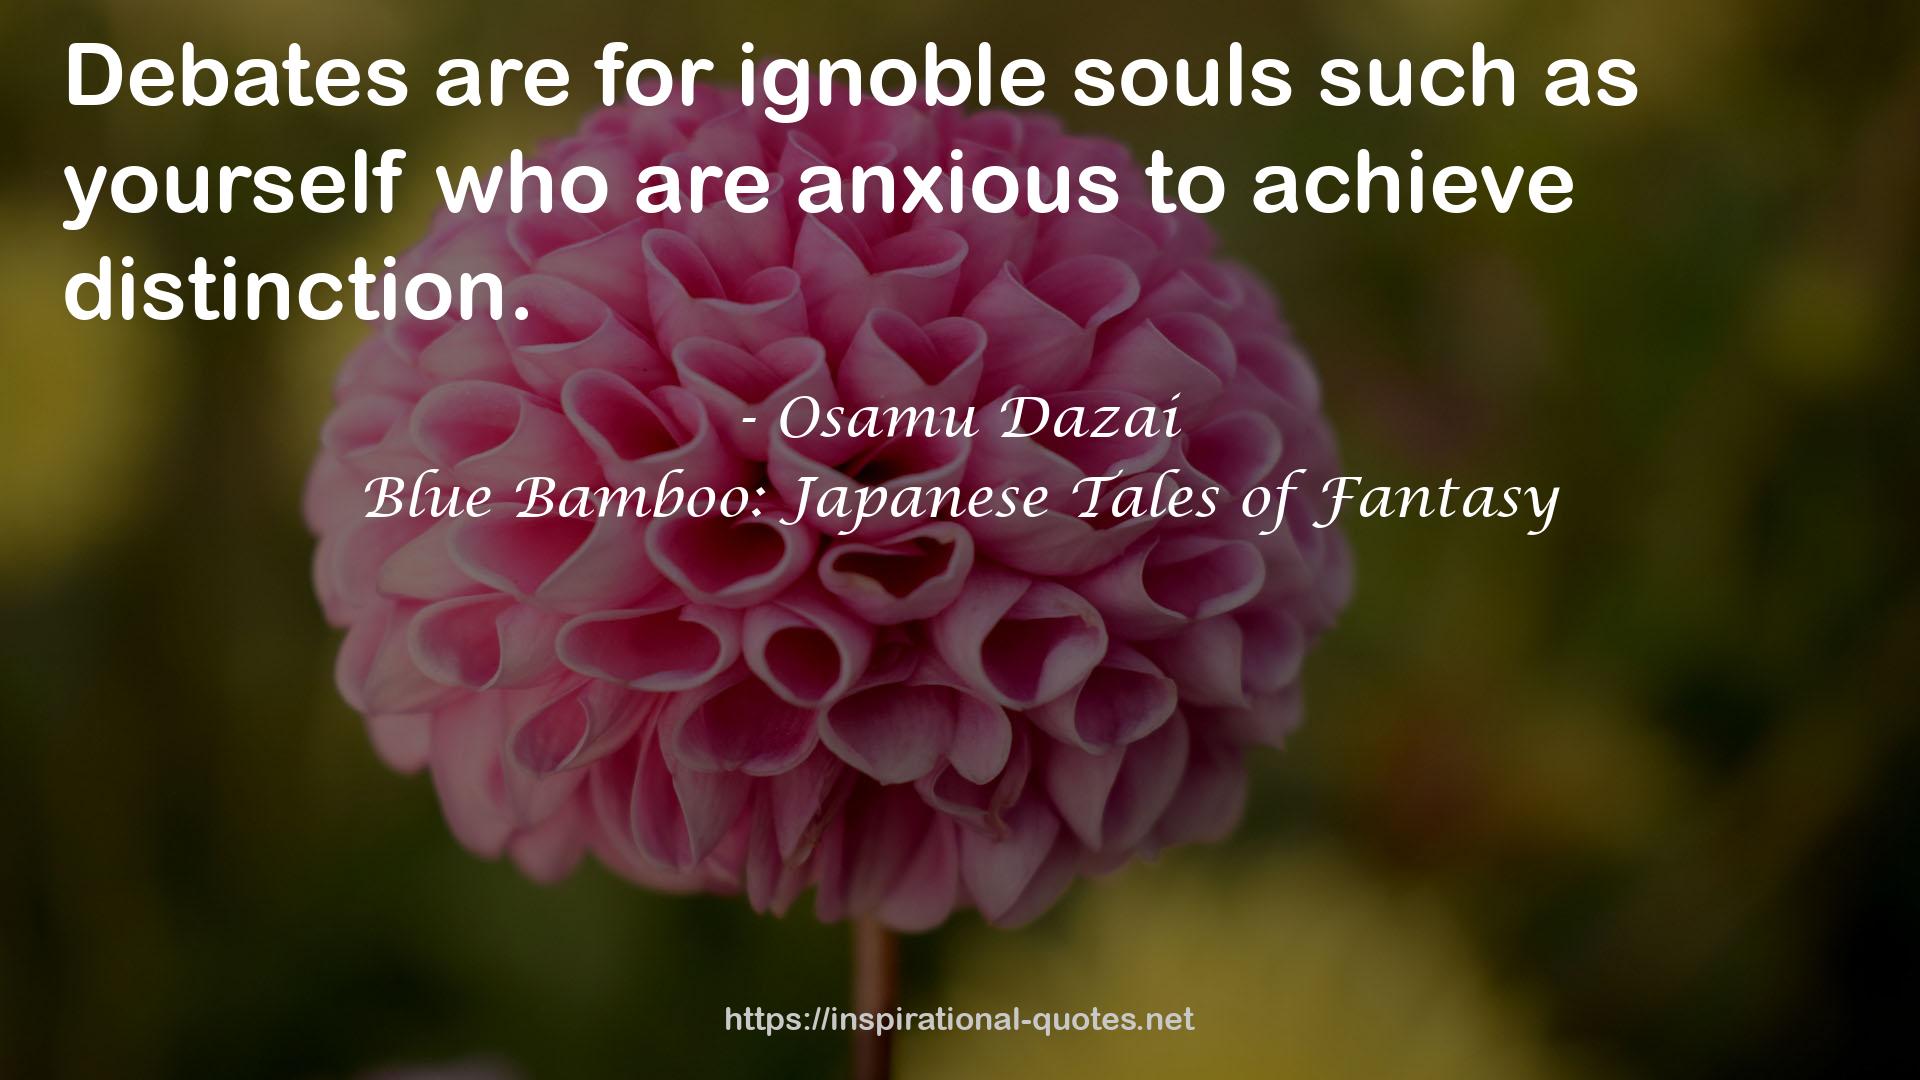 Blue Bamboo: Japanese Tales of Fantasy QUOTES